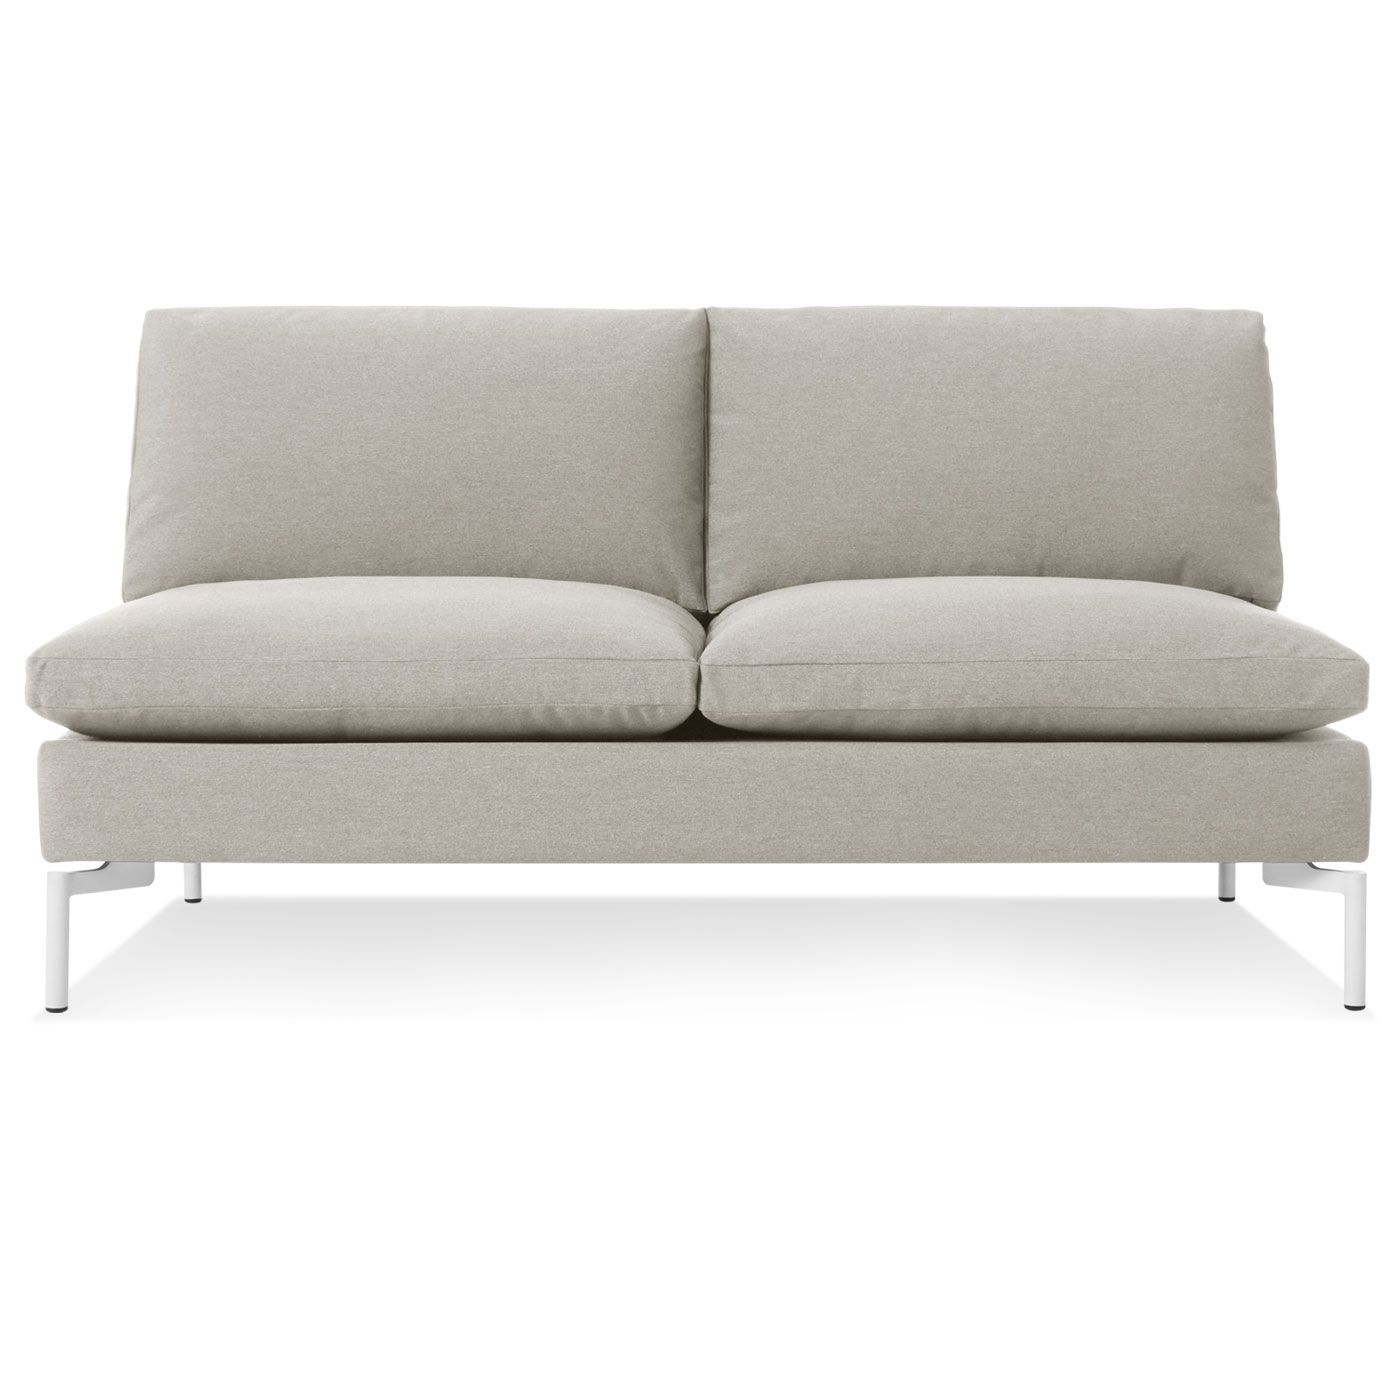 New Standard Armless Sofa – Modern Sofas And Sectionals – Bludot Within Favorite Small Armless Sofas (View 1 of 20)